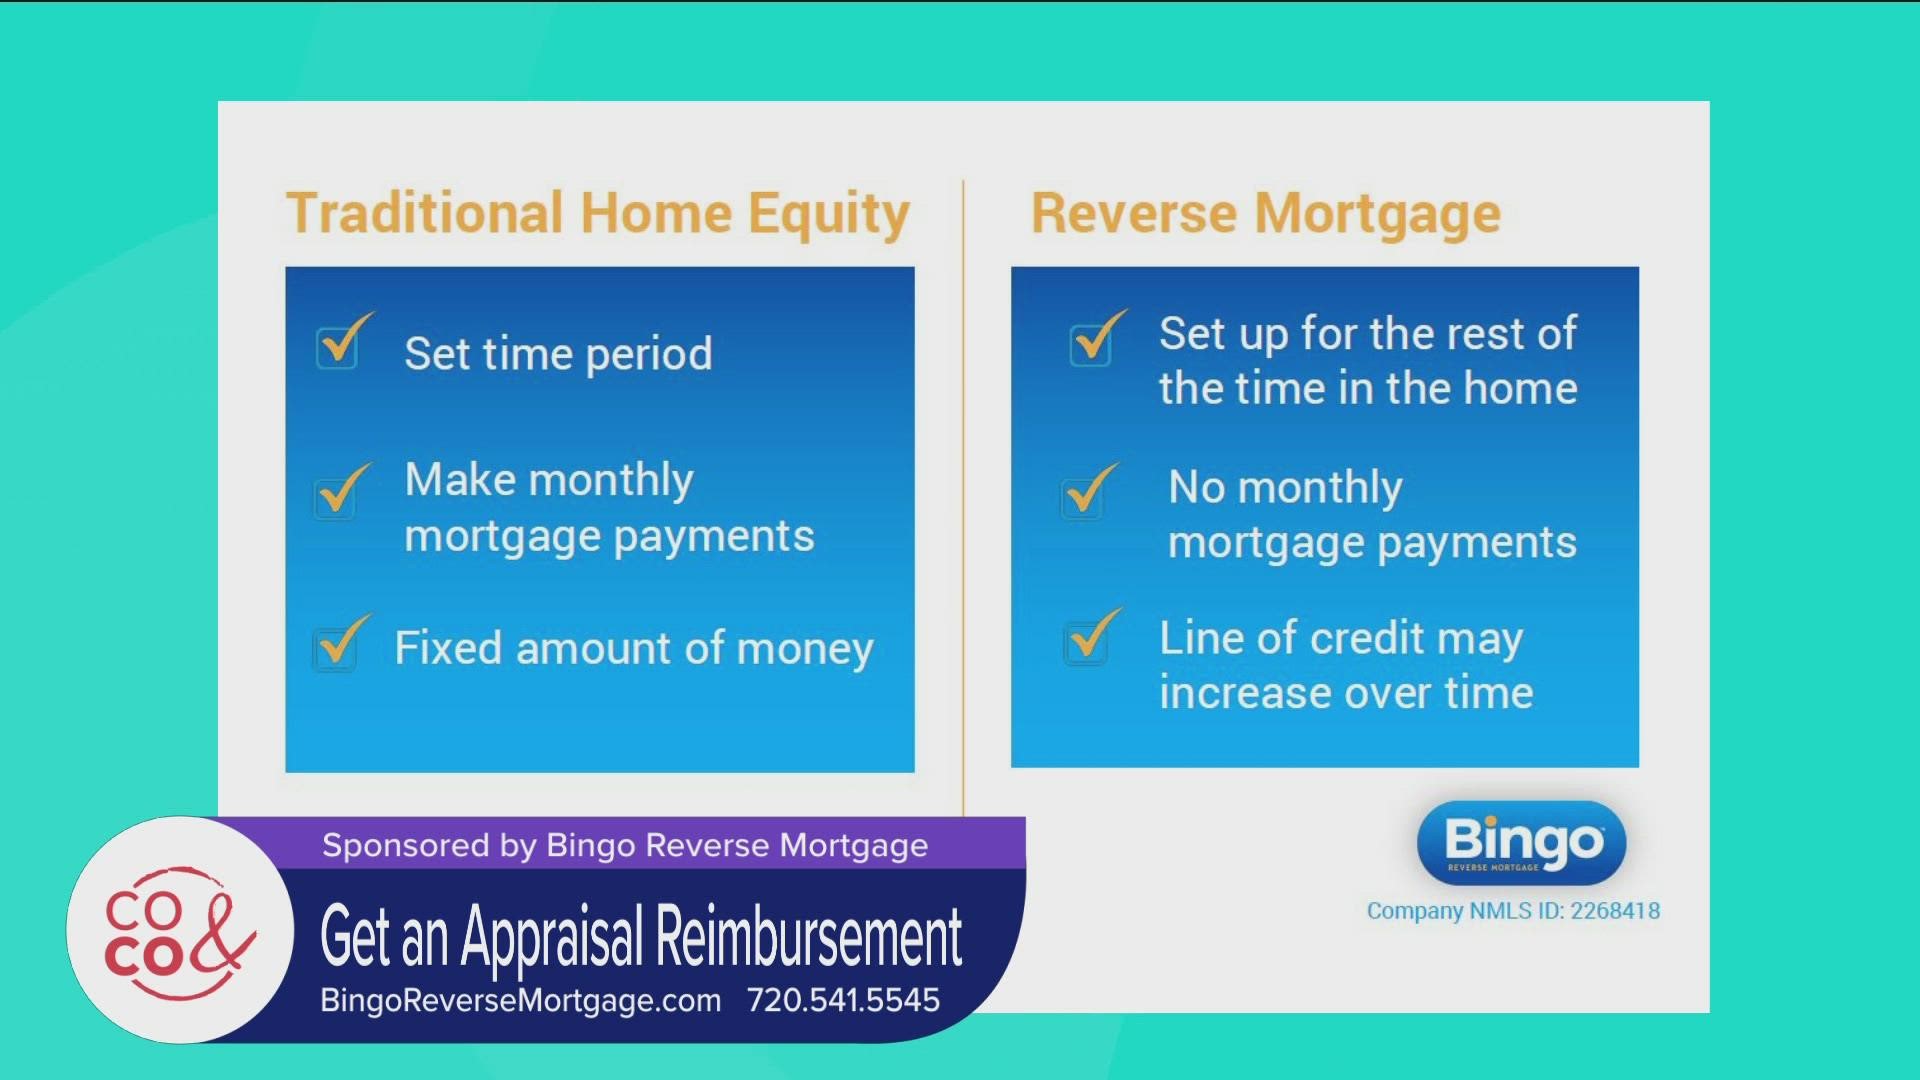 Call 720.541.5545 or visit BingoReverseMortgage.com to find out if a reverse mortgage is right for you. **PAID CONTENT**